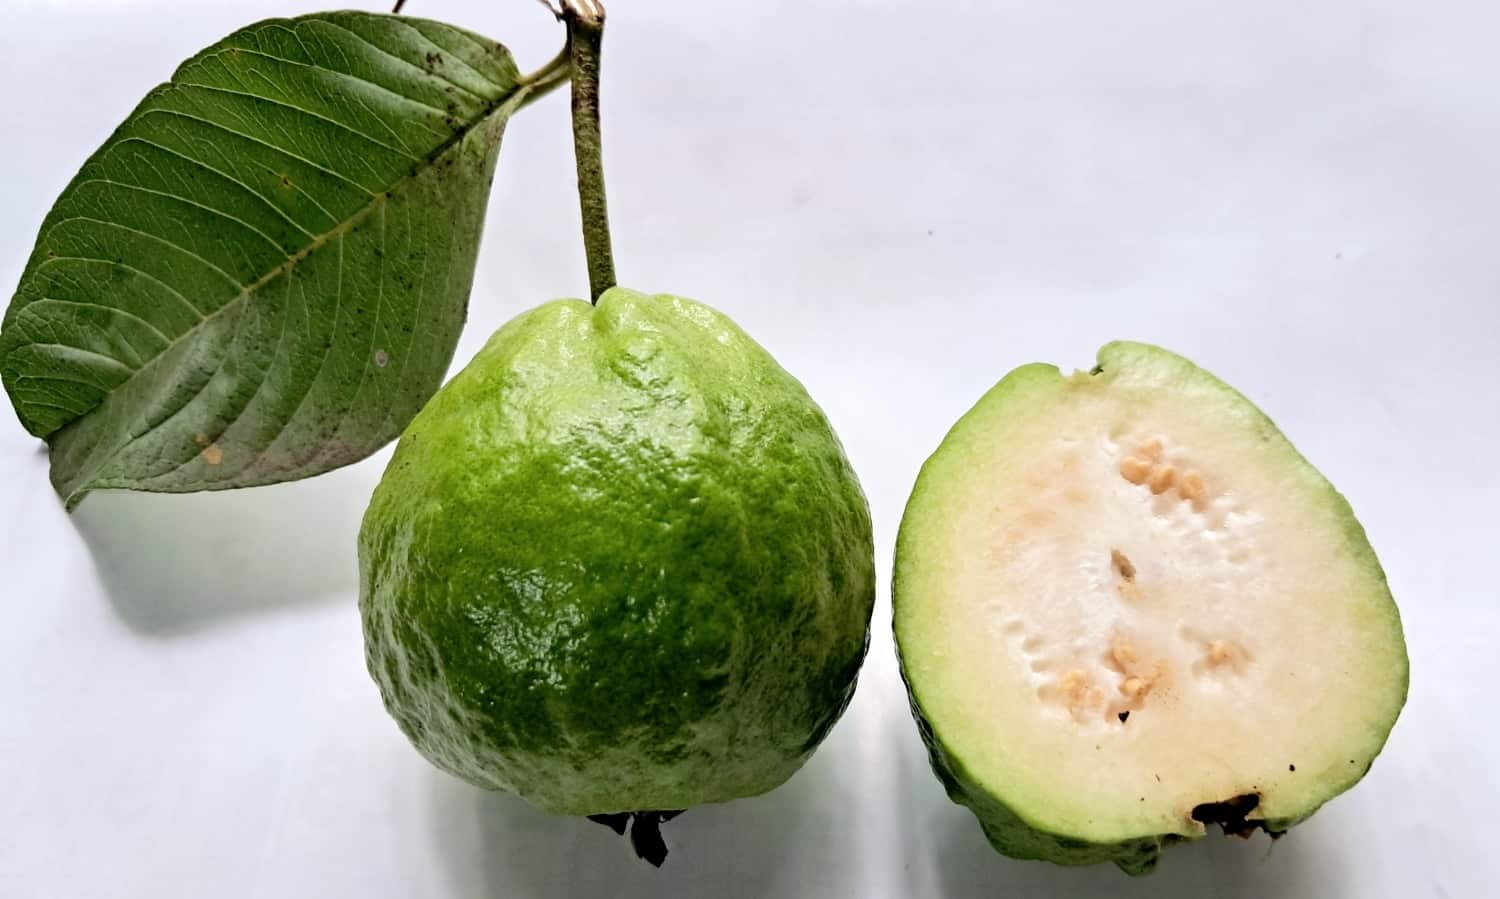 A piece of cut guava and a whole guava are kept on the table